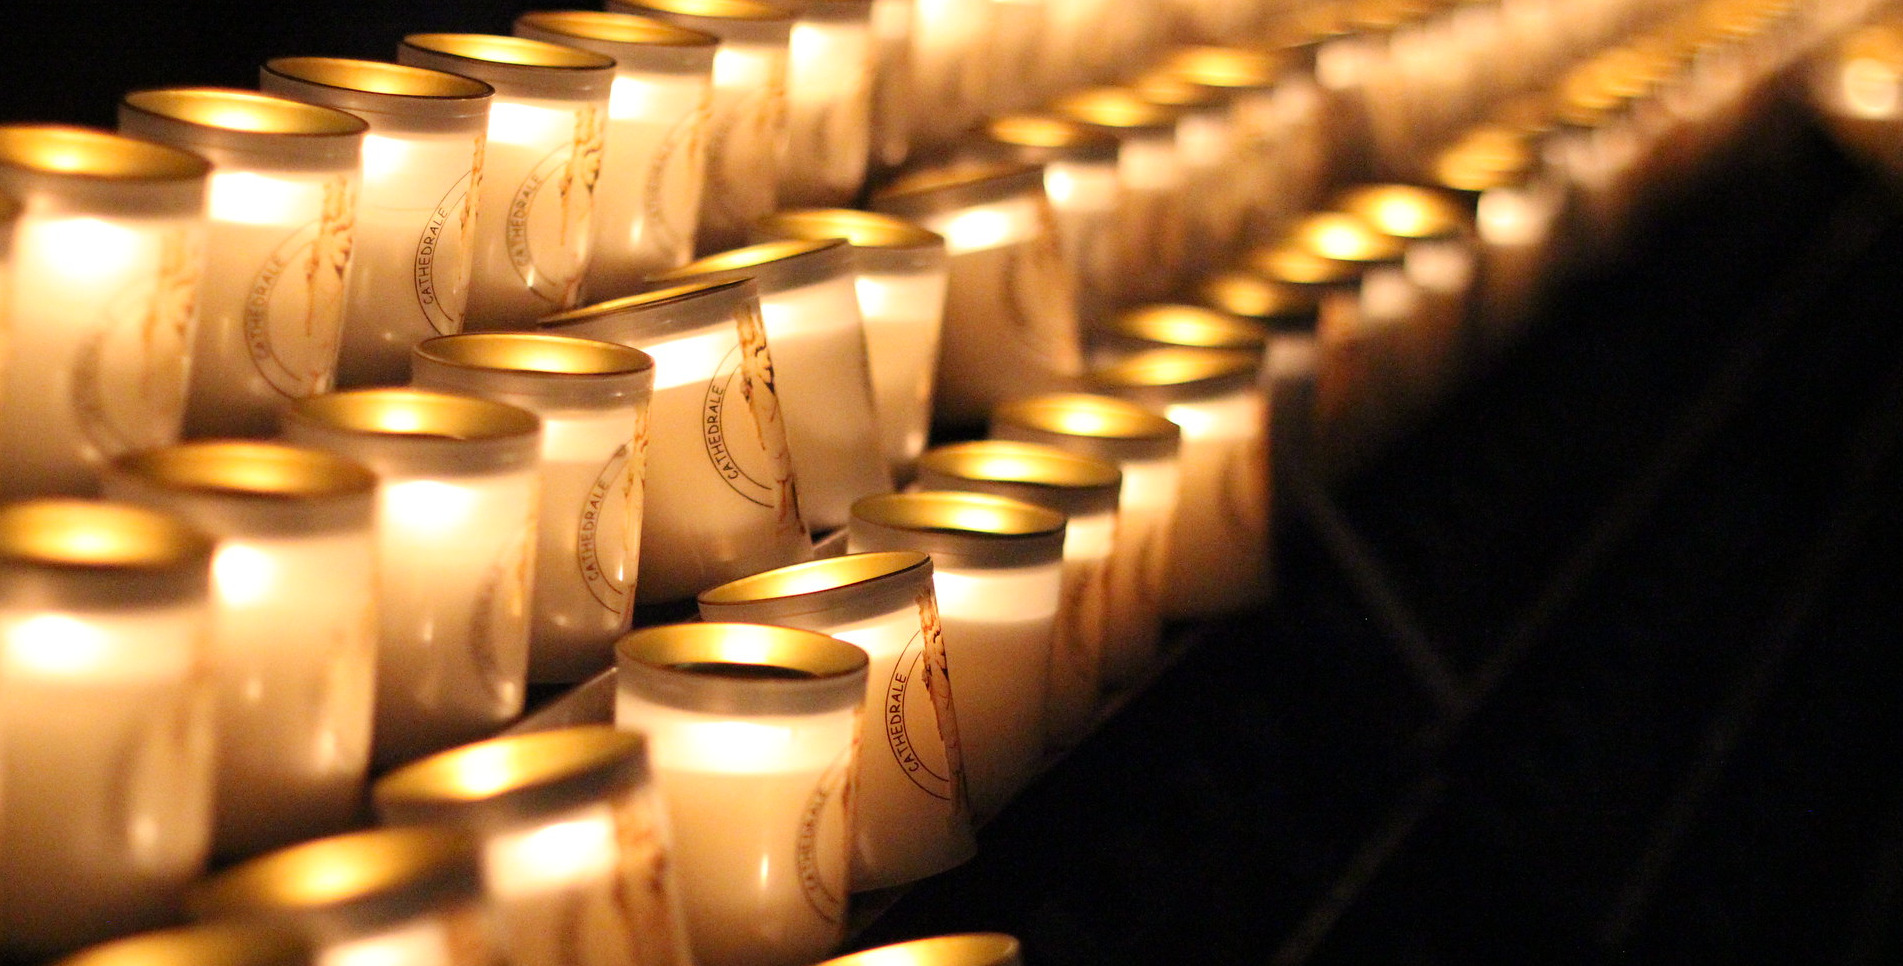 Candles in Notre Dame...